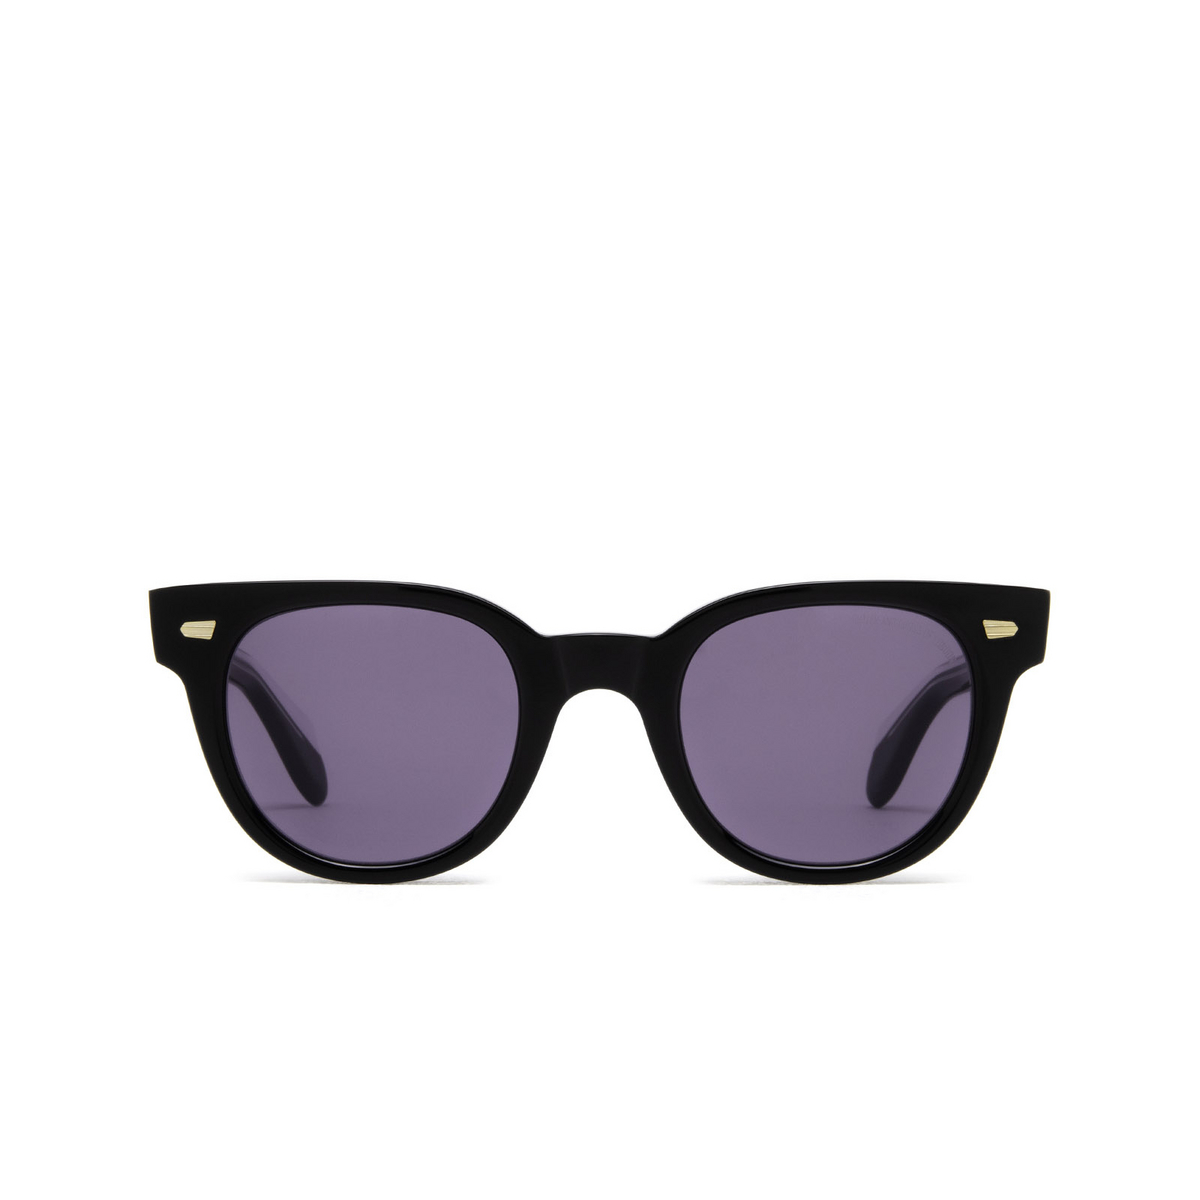 Cutler and Gross® Round Sunglasses: 1392 SUN color Black 01 - front view.